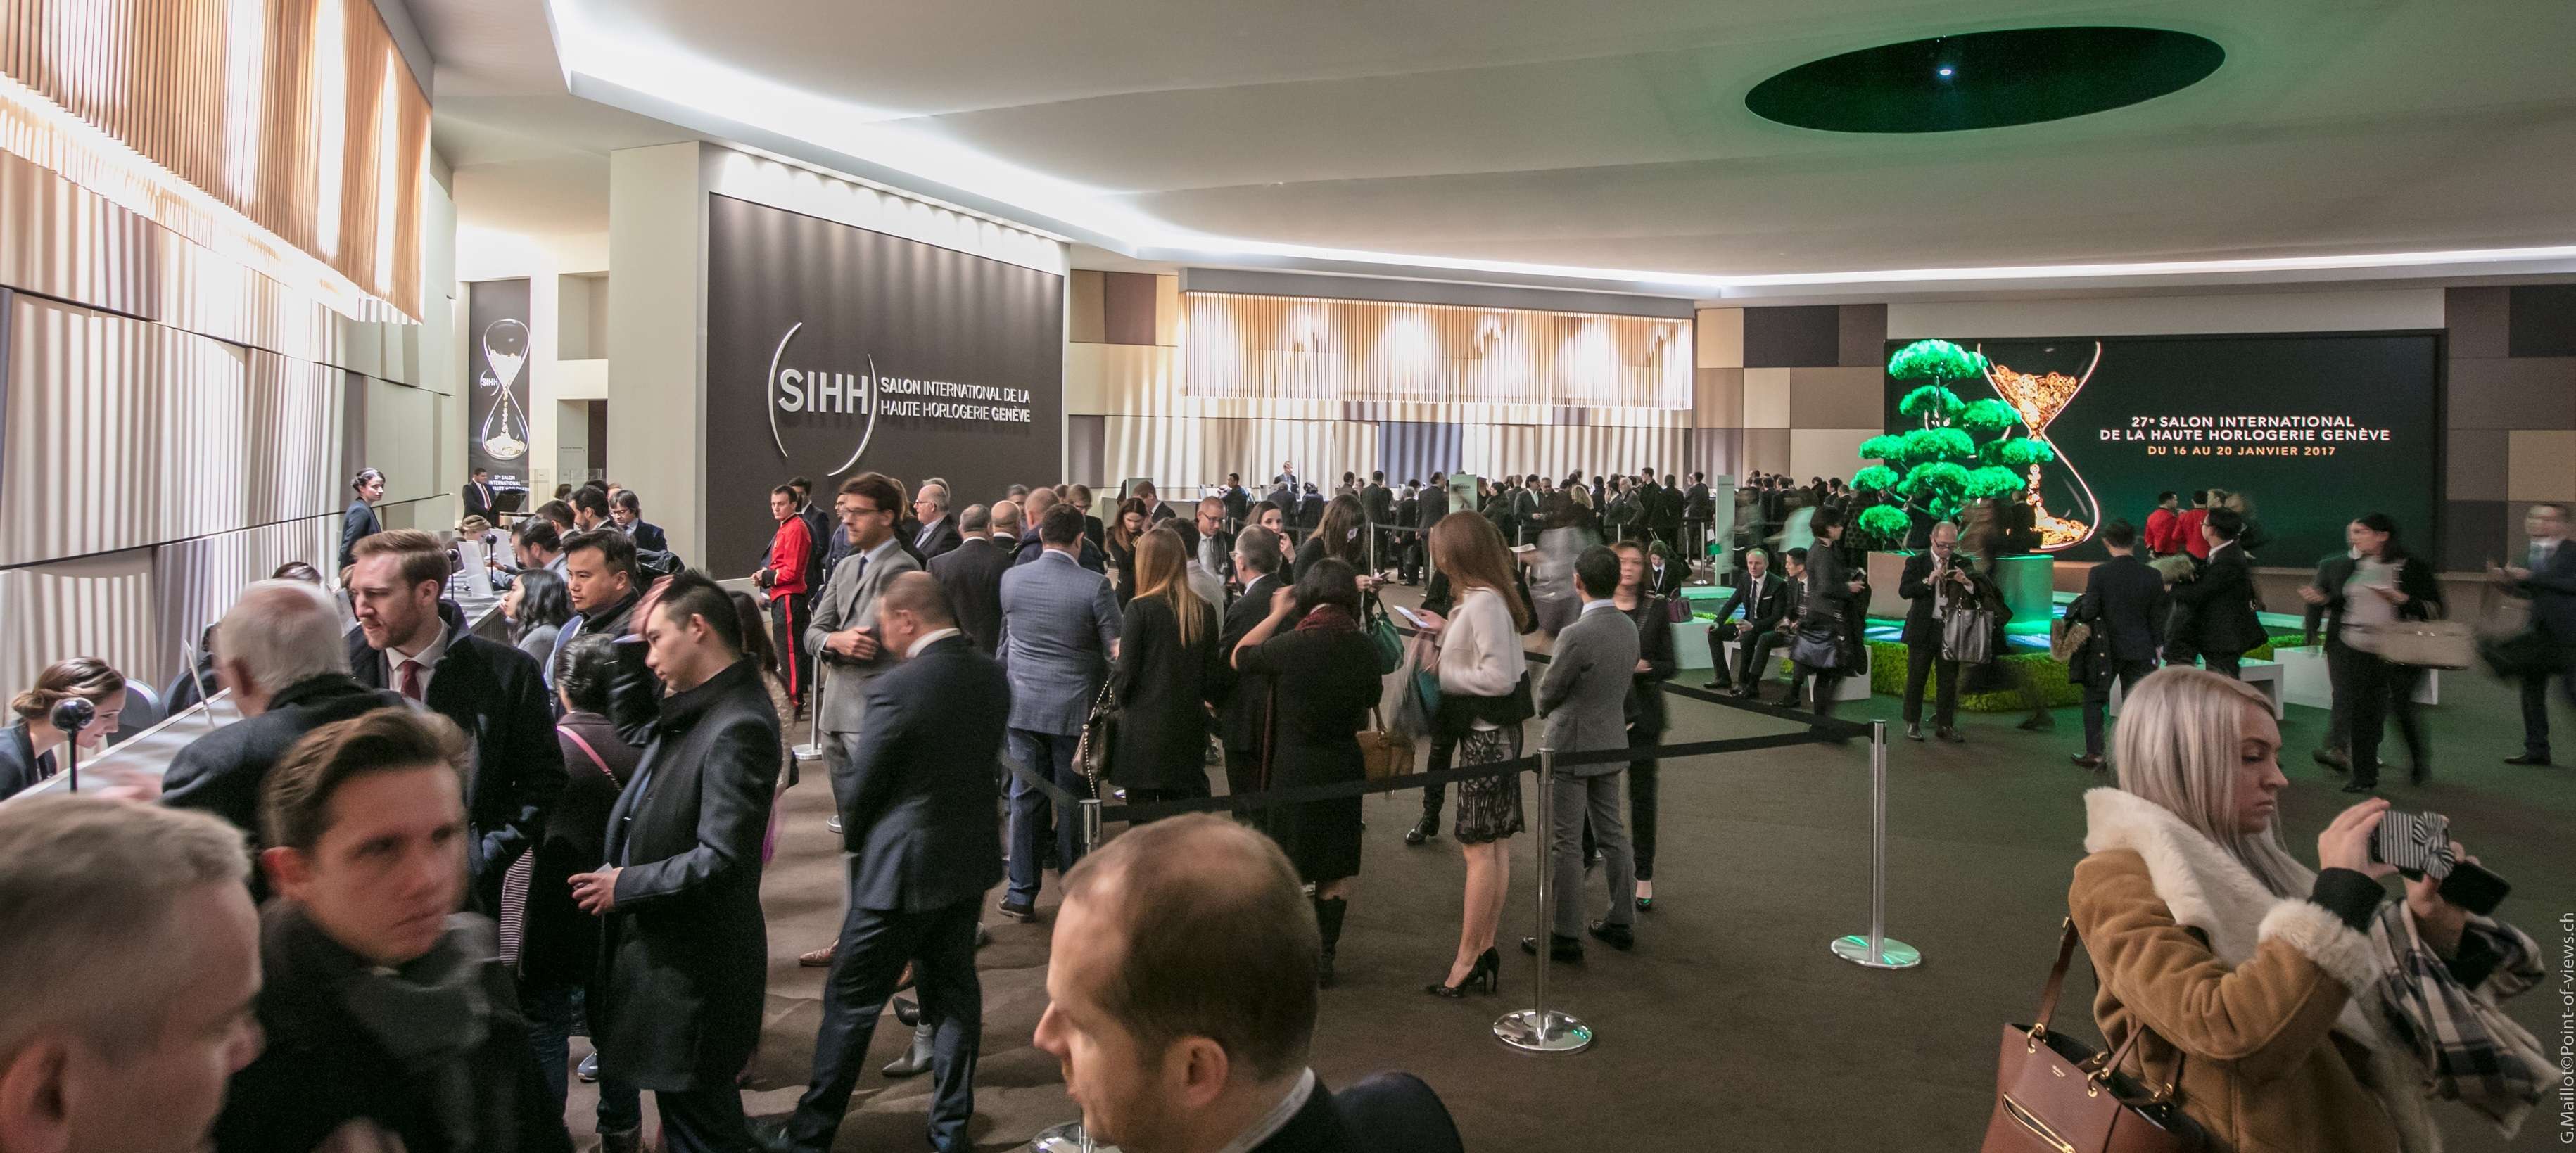 Brands competed for attention as fiercely as ever at this year’s Salon International de la Haute Horlogerie in Geneva.